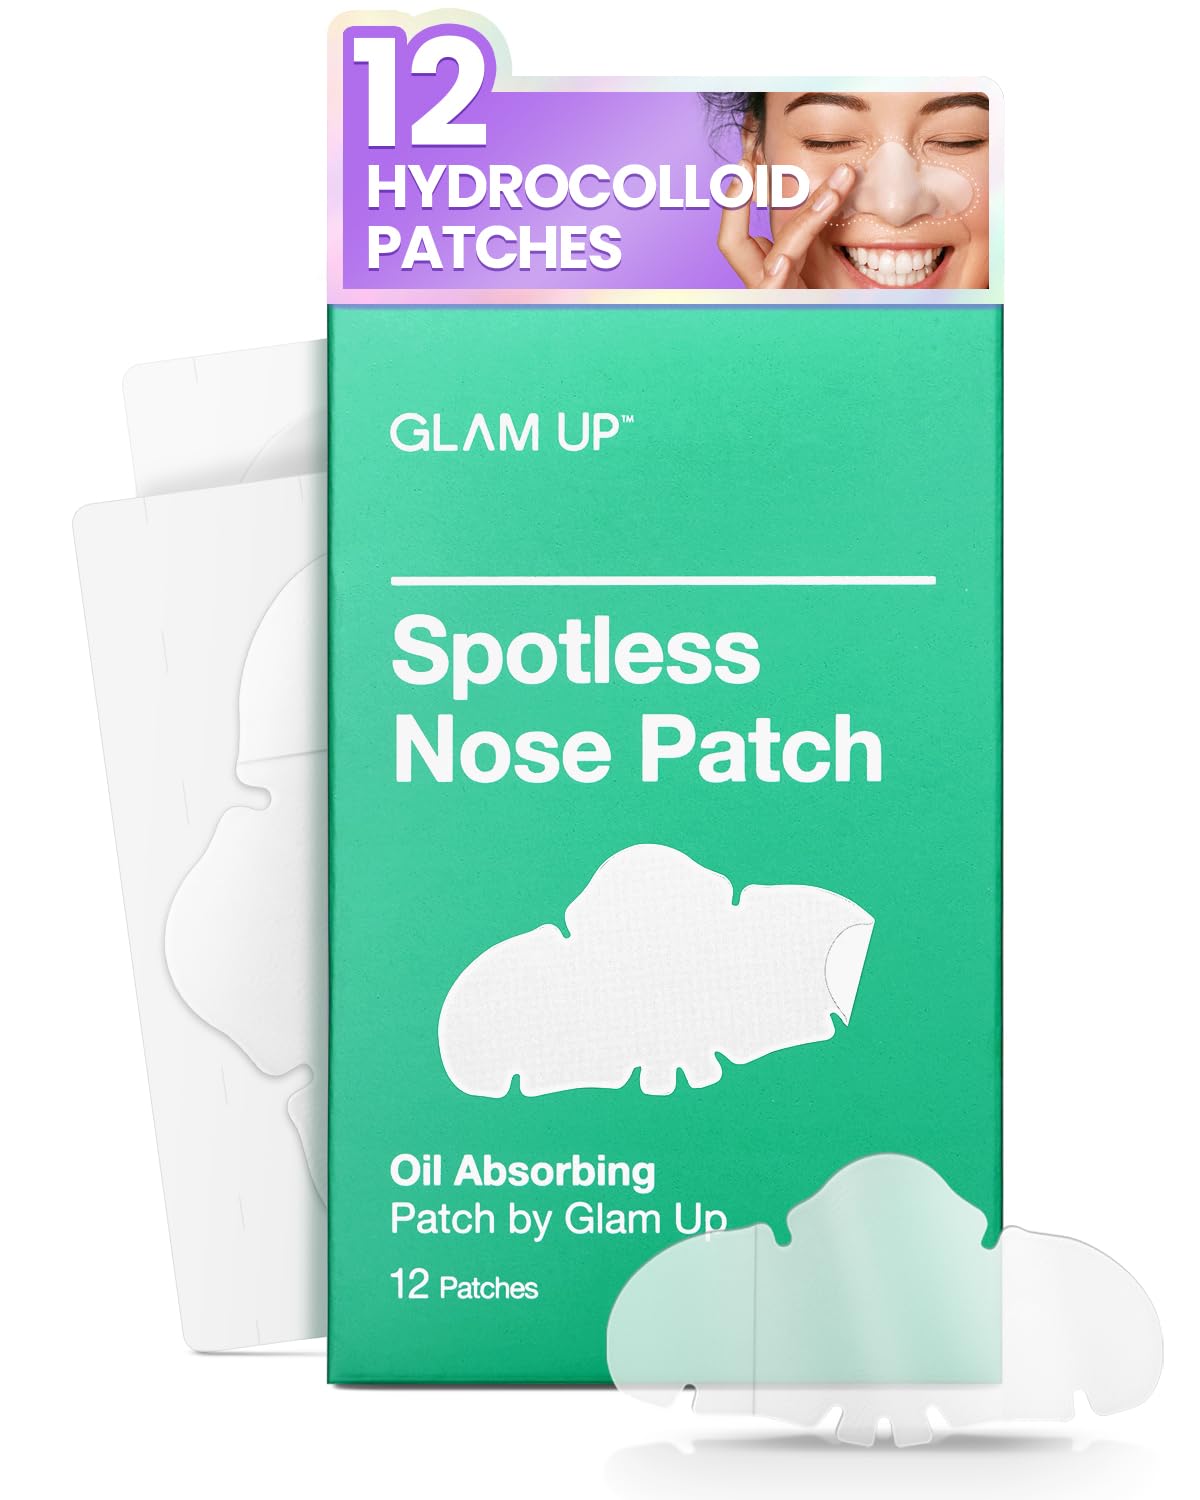 Hydrocolloid patches are a natural way to protect your skin from the elements. They are made of a water-absorbing material that helps to keep your skin hydrated and protected